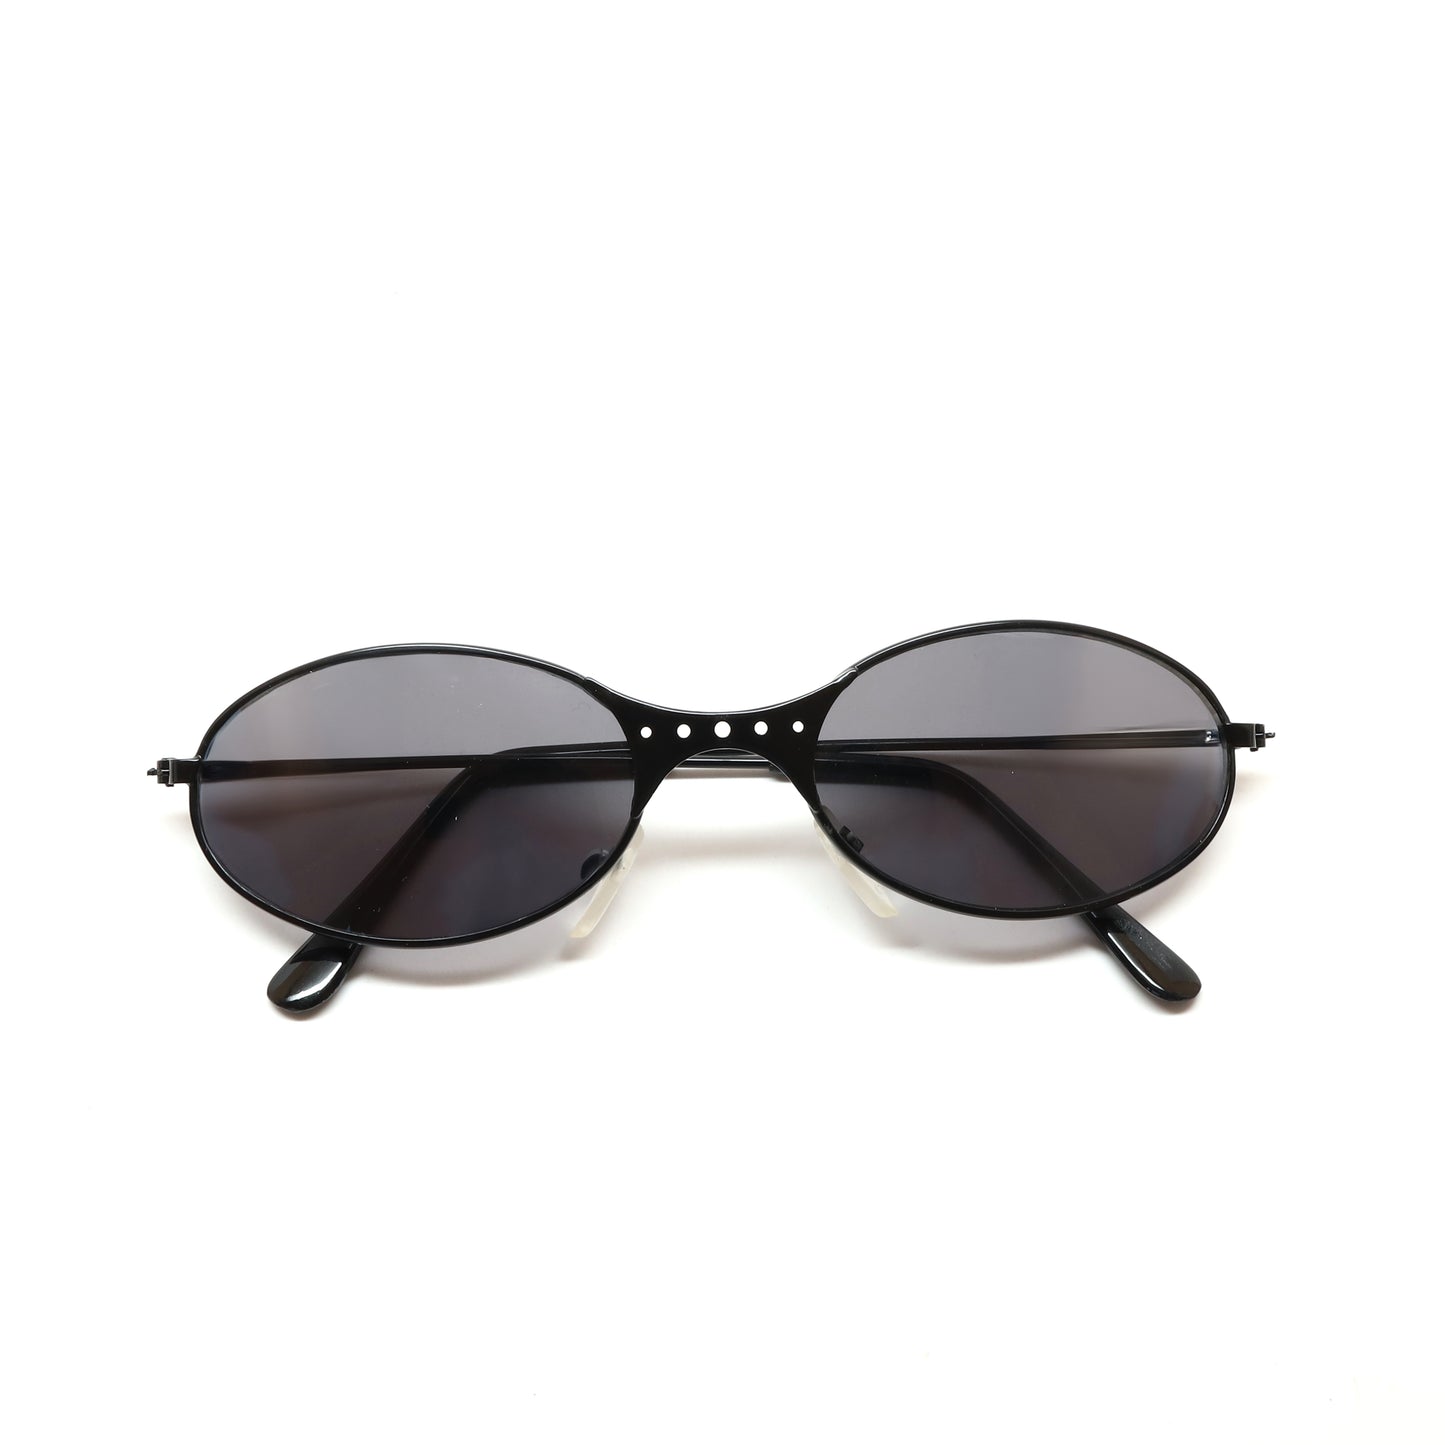 Deadstock Vintage Industrial Style Wire Oval Sunglasses - Black